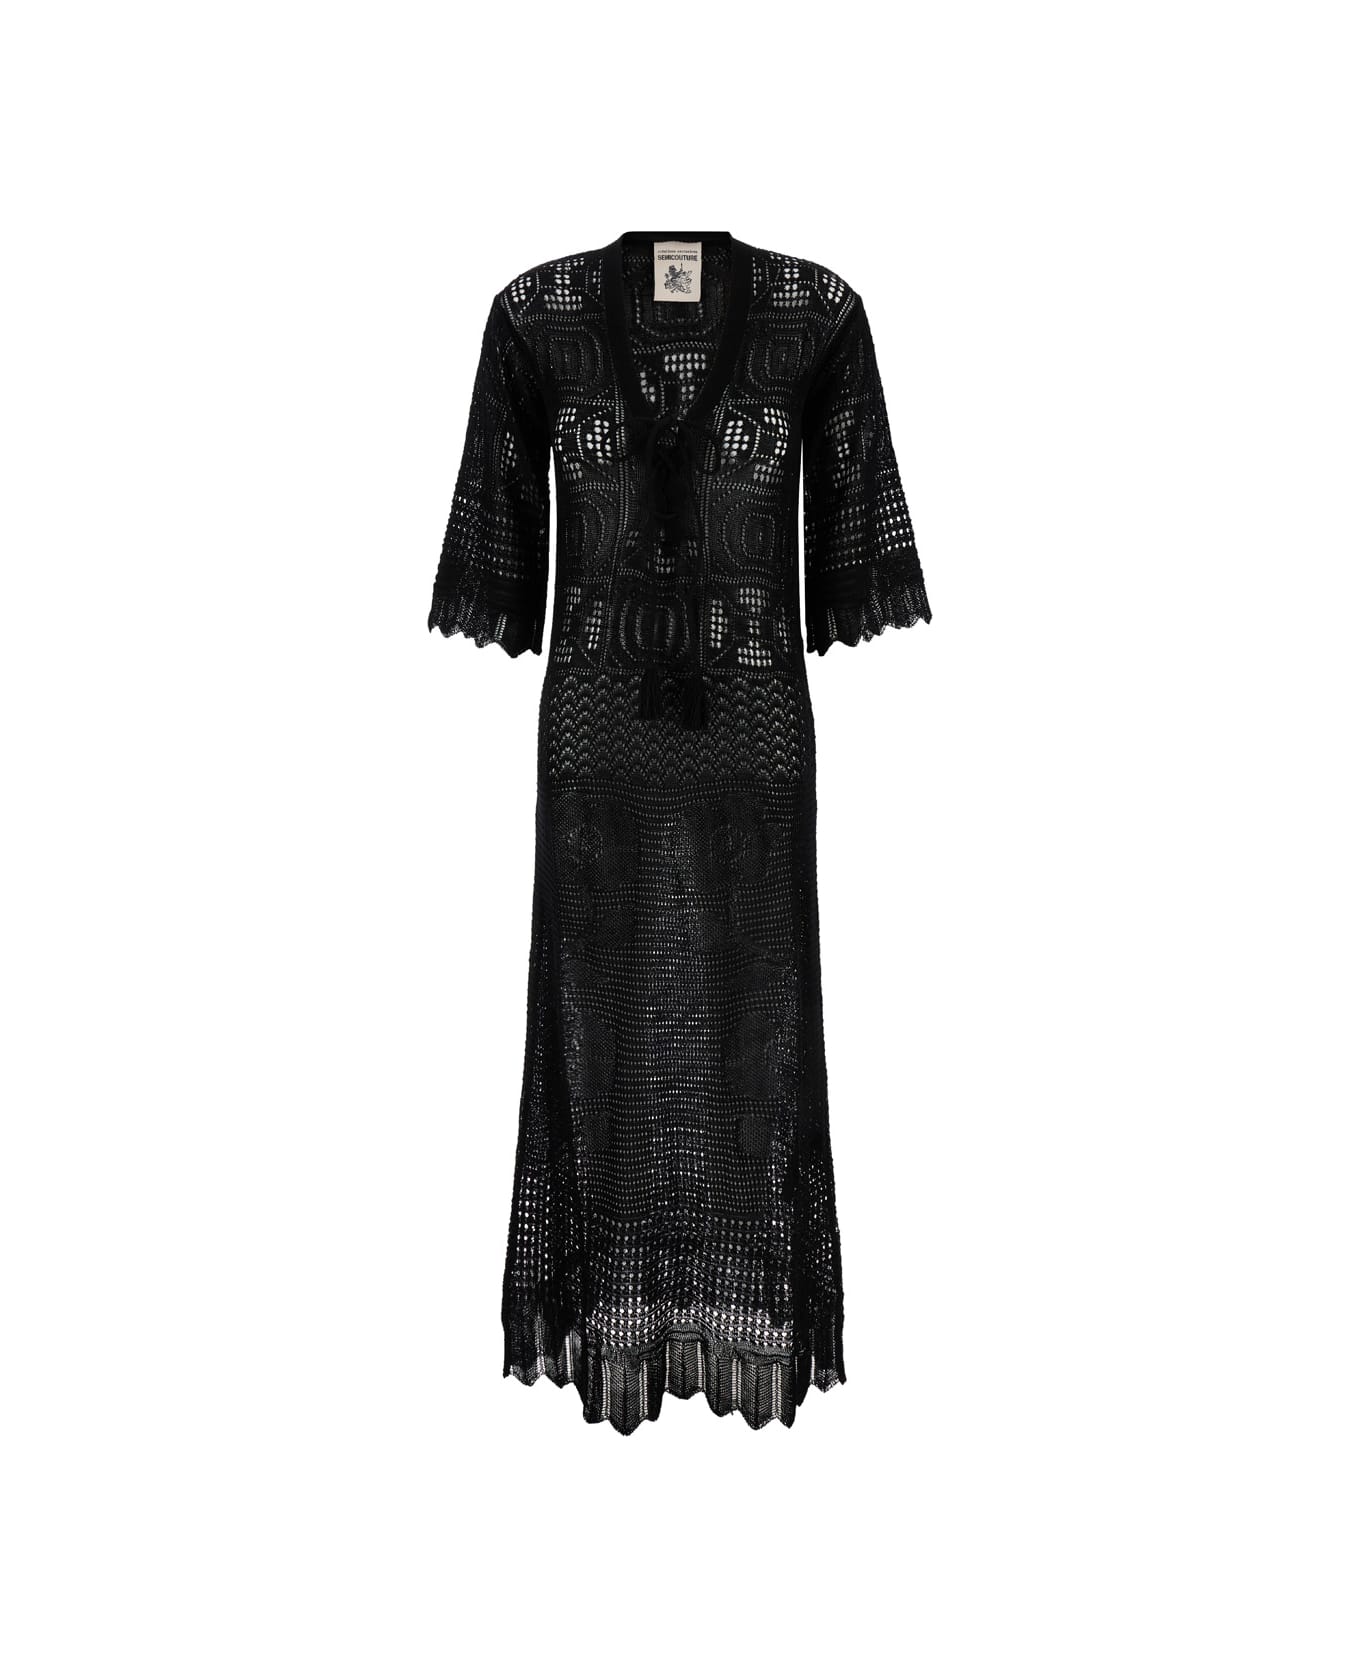 SEMICOUTURE Long Black Dress With Lace-up Closure In Cotton Lace Woman - Black ワンピース＆ドレス